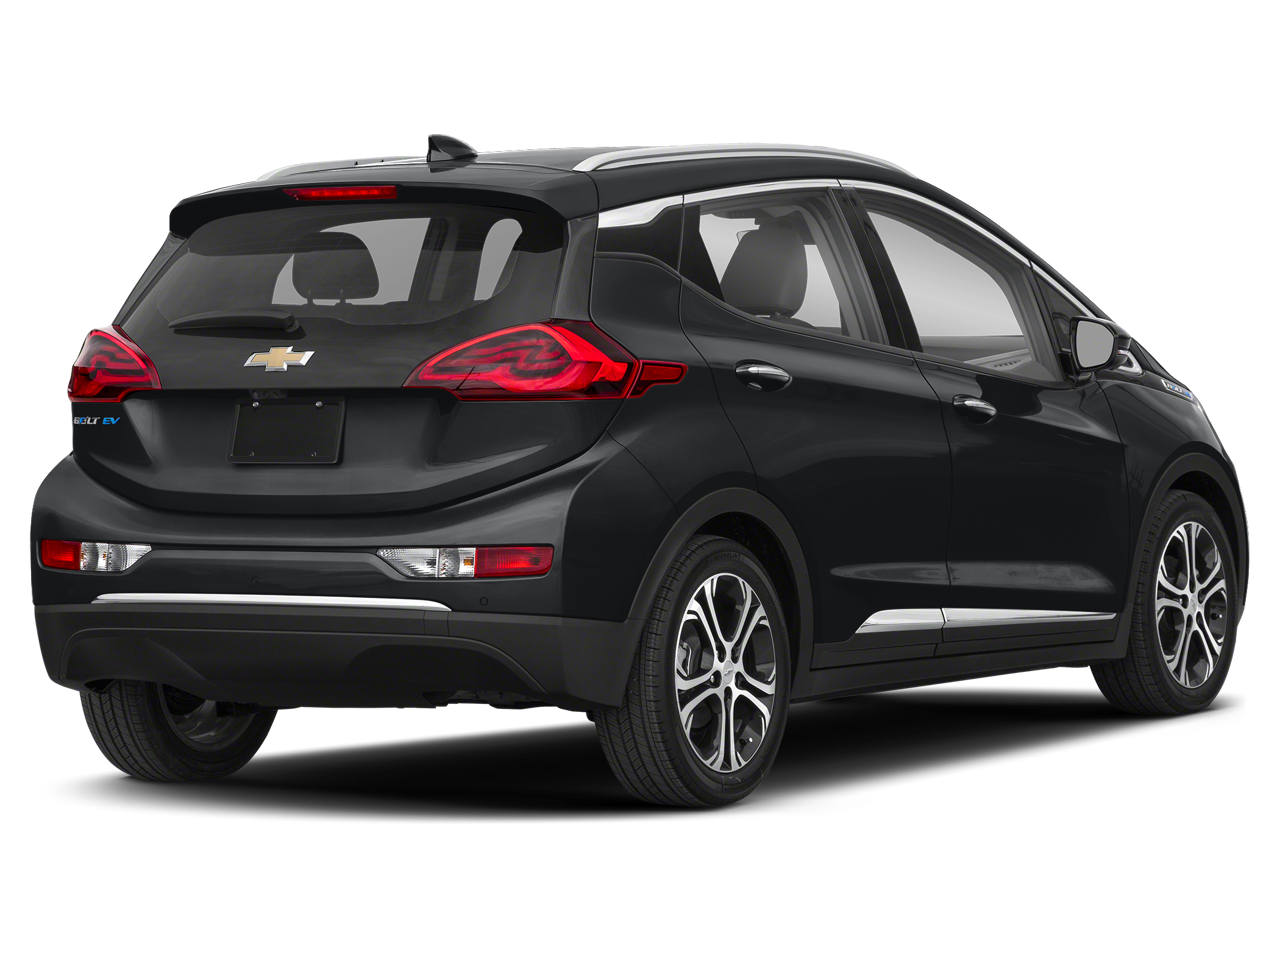 Used 2021 Chevrolet Bolt EV Premier with VIN 1G1FZ6S03M4111049 for sale in Upland, CA